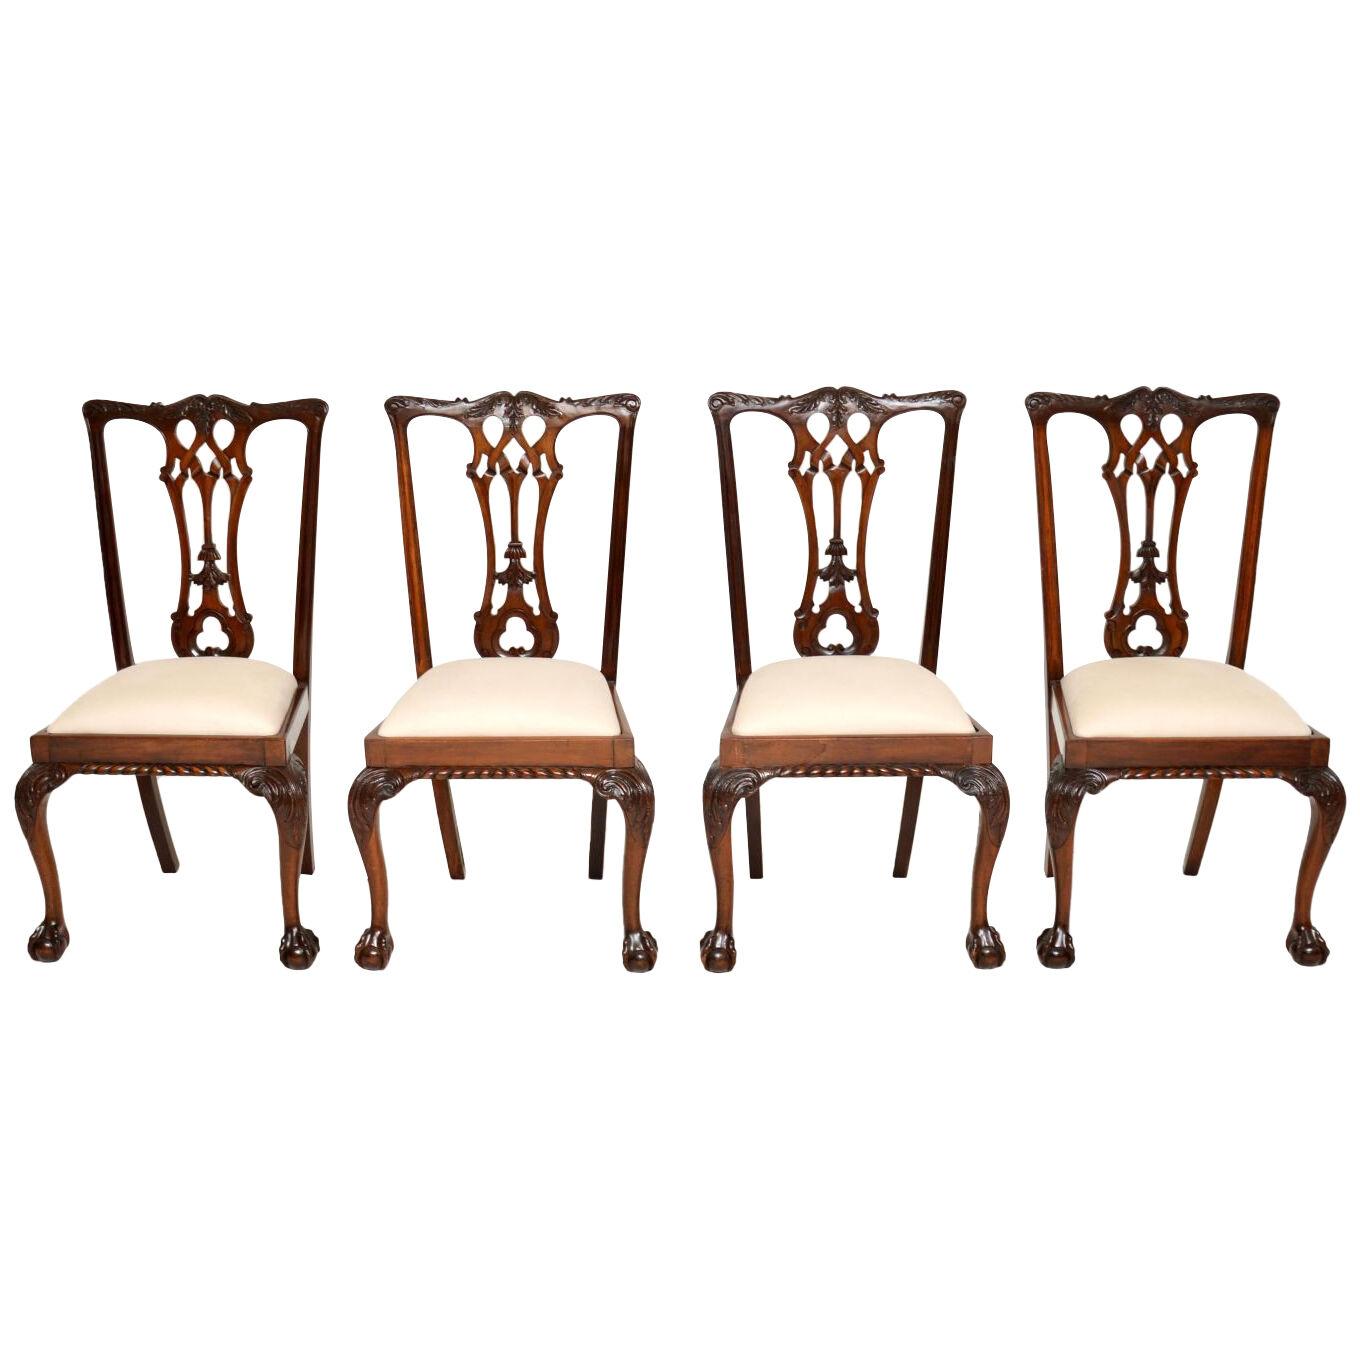 Set of 4 Antique Mahogany Chippendale Dining Chairs